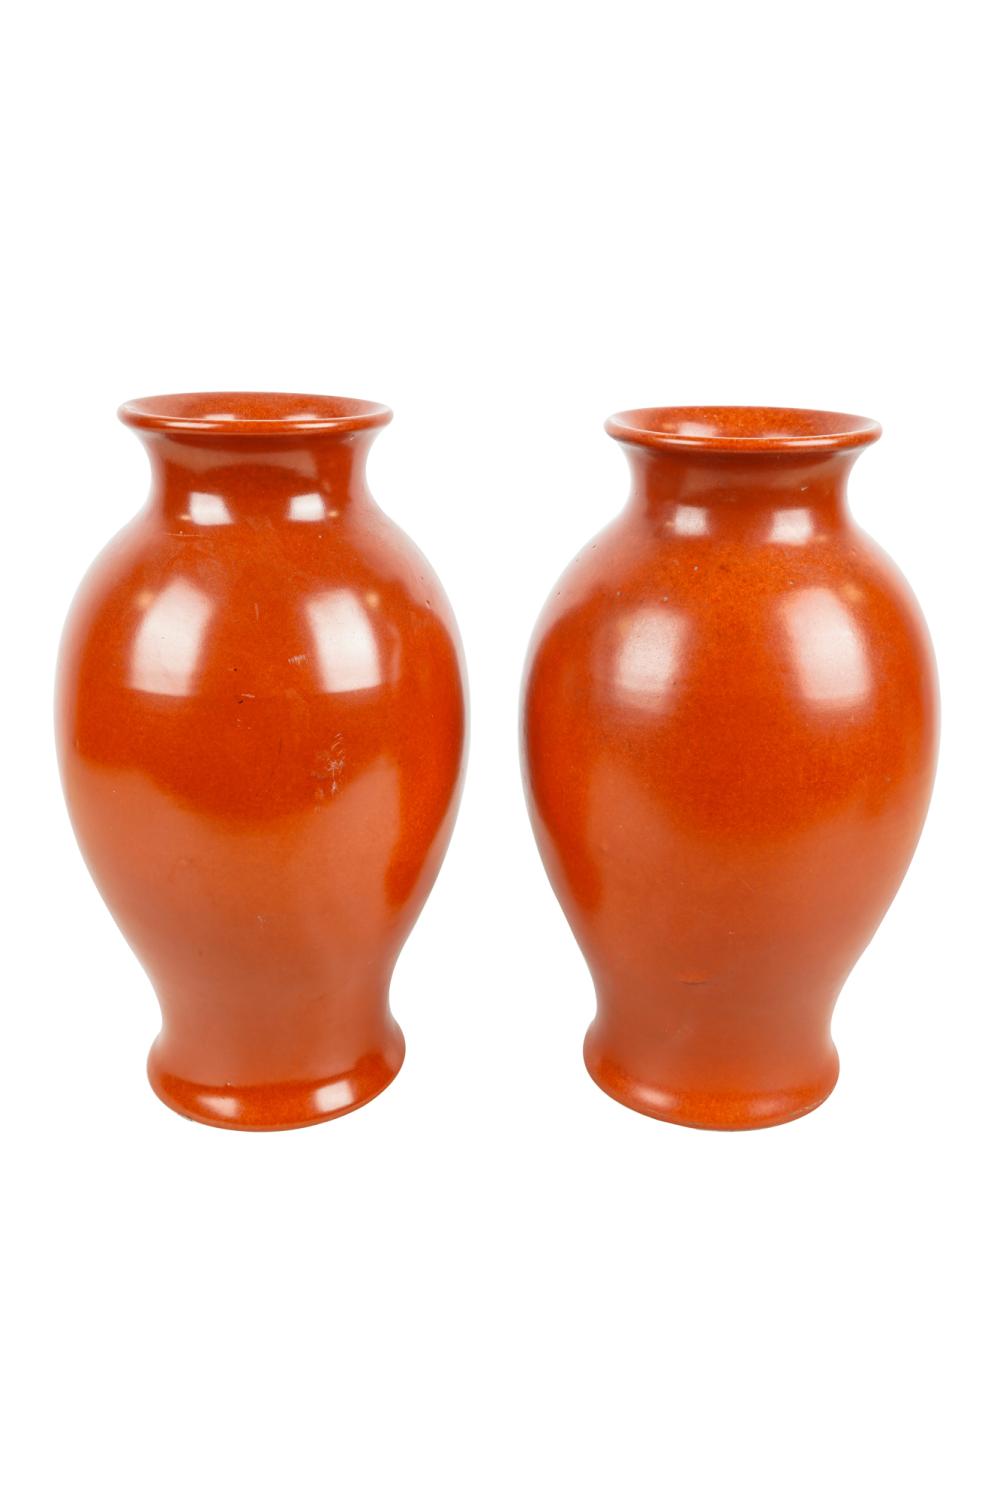 PAIR OF CHINESE CORAL RED GLAZED 336d44